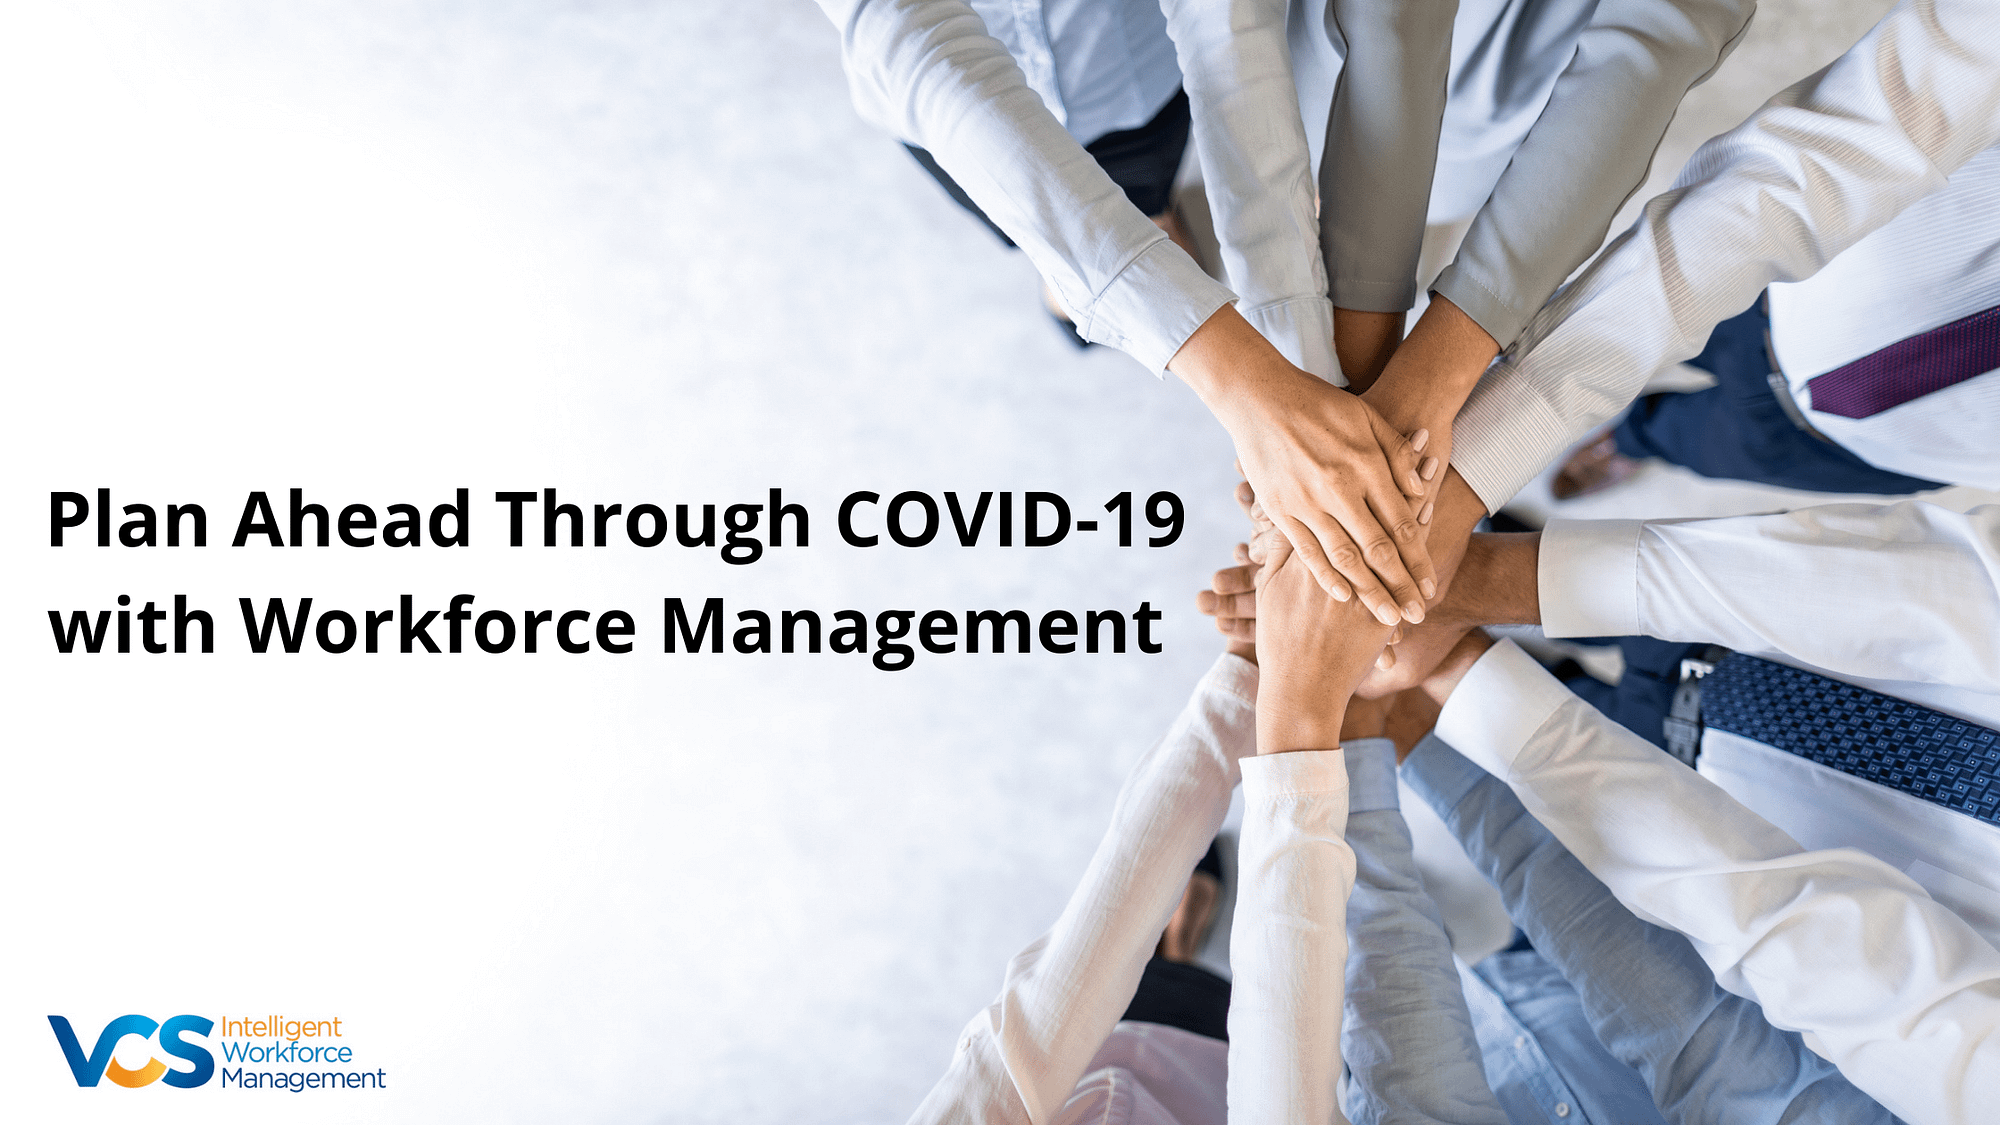 Plan Ahead Through COVID-19 with Workforce Management